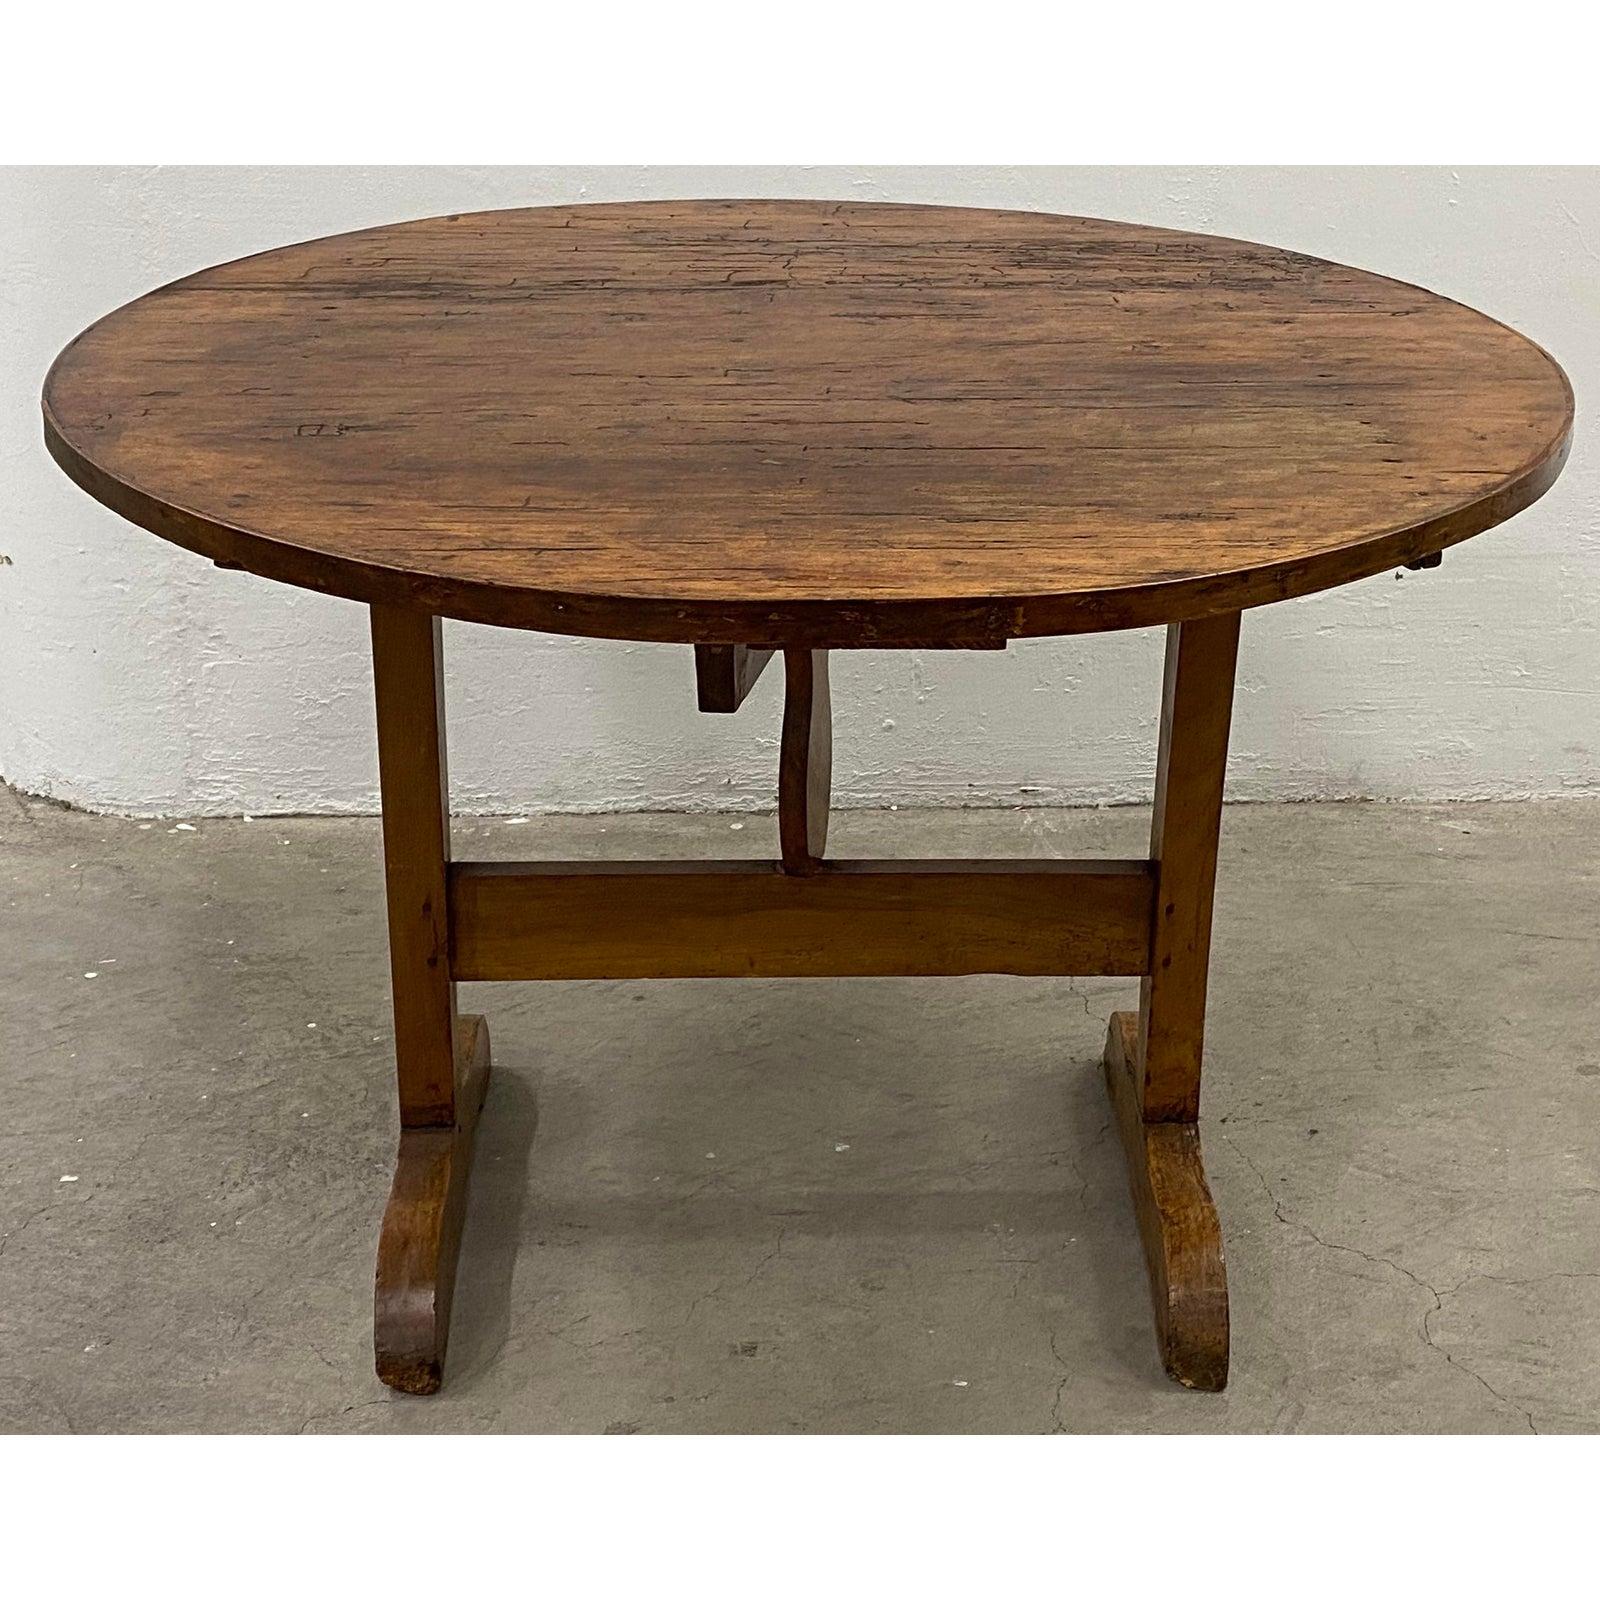 19th century French tilt-top tavern or wine table

A Classic French 